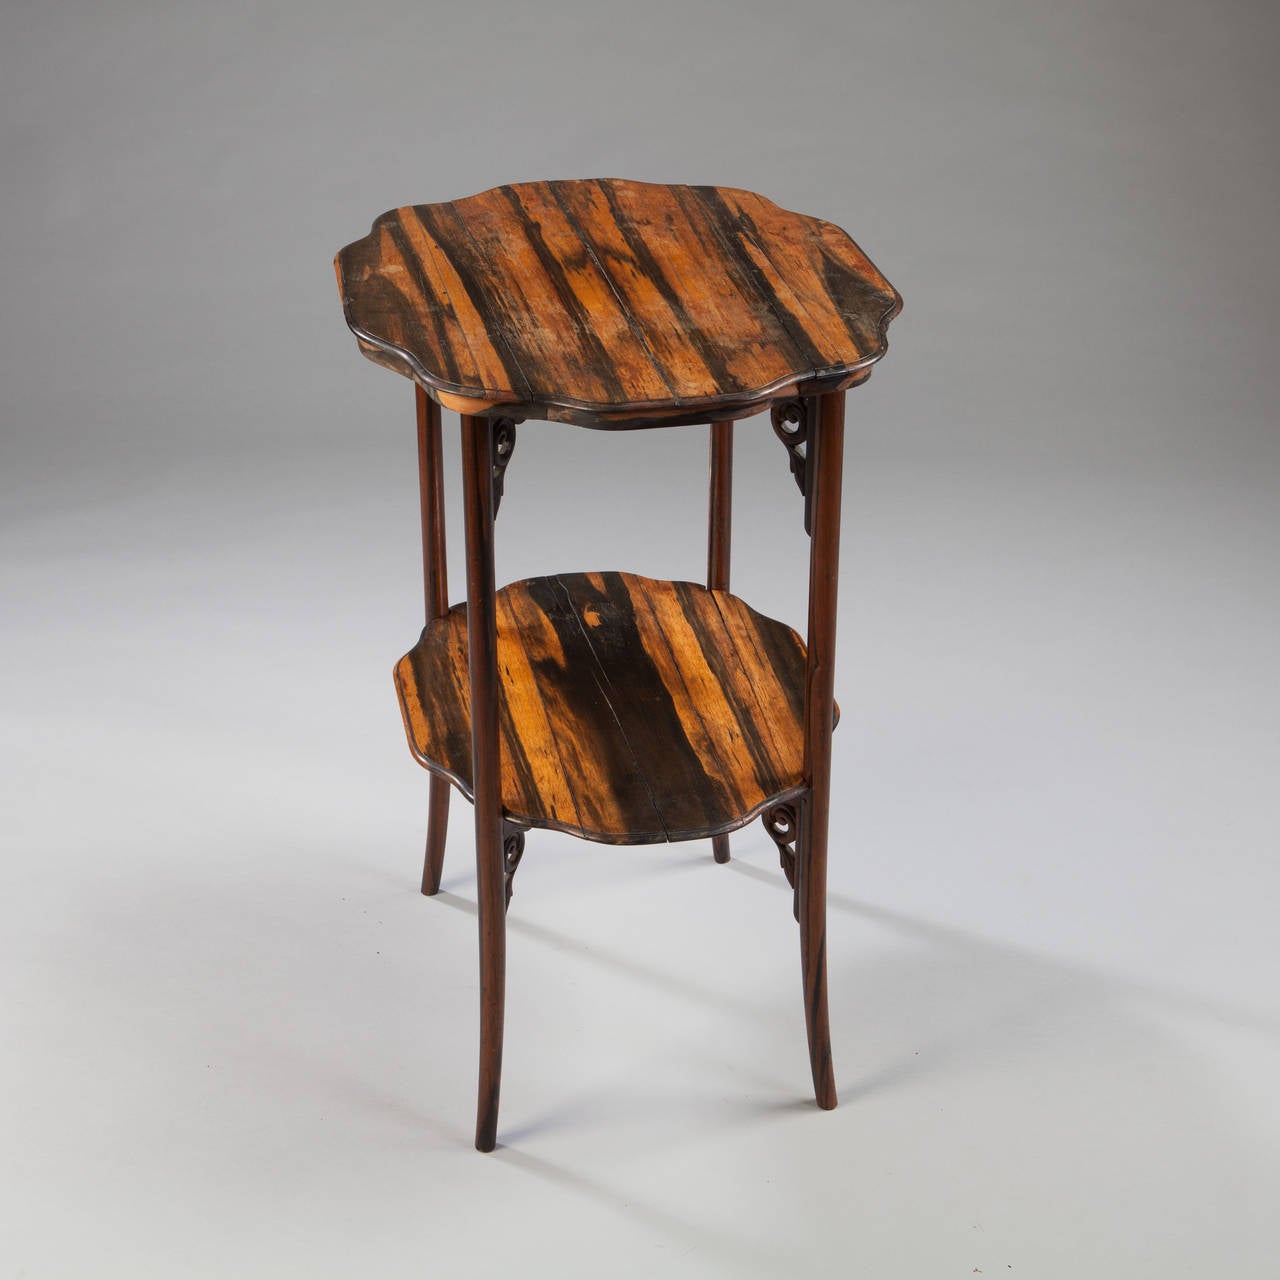 Calamander Wood Folding Campaign Table For Sale at 1stdibs